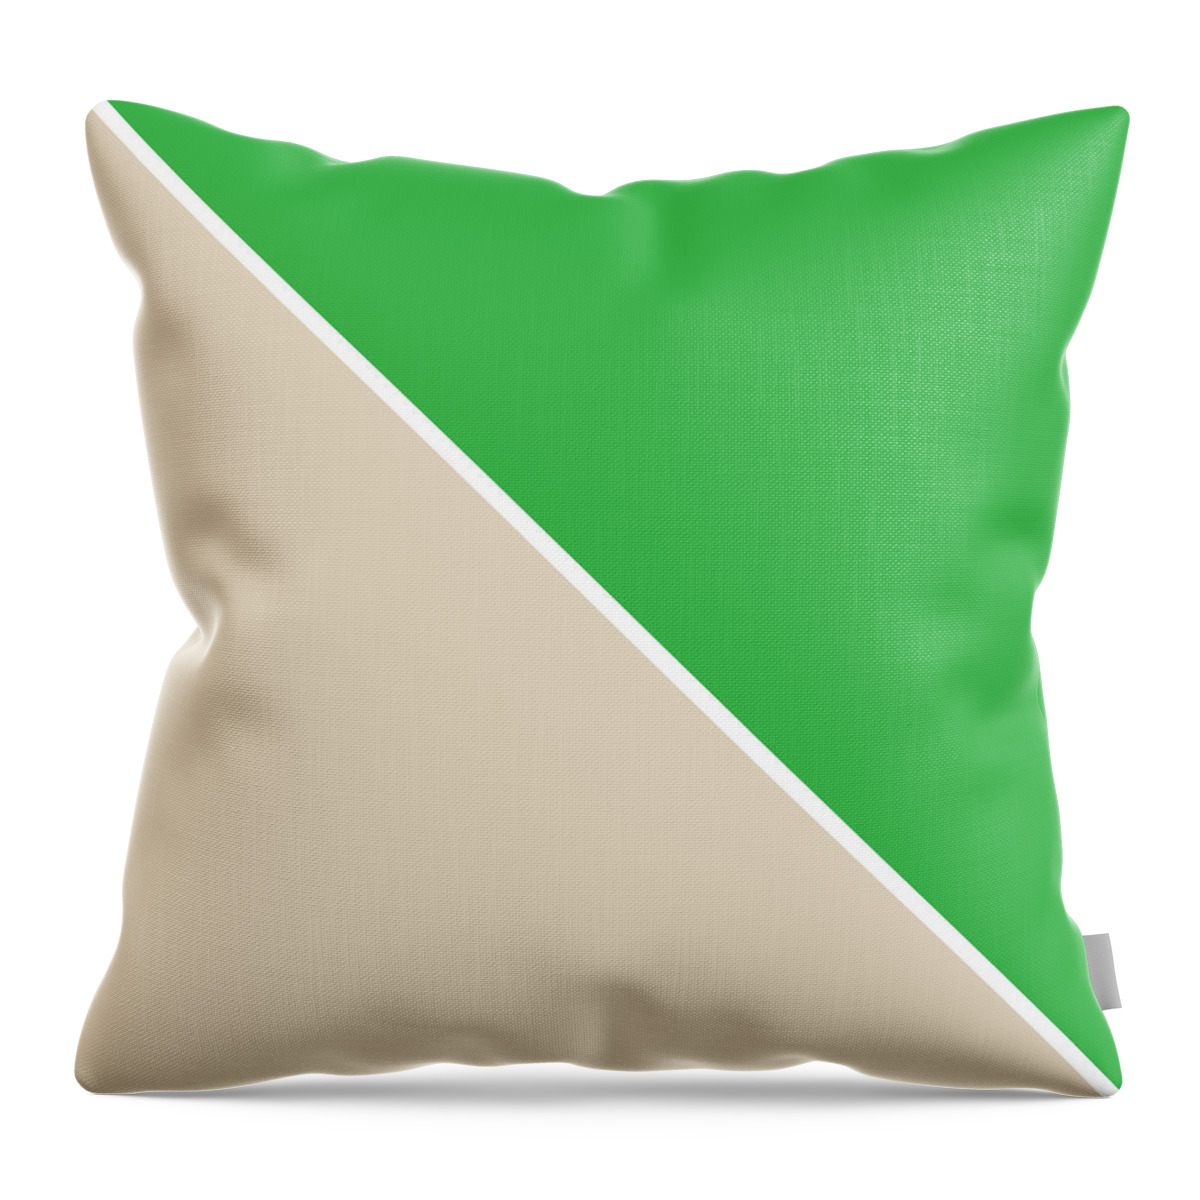 Green Throw Pillow featuring the digital art Grass and Sand Geometric by Linda Woods